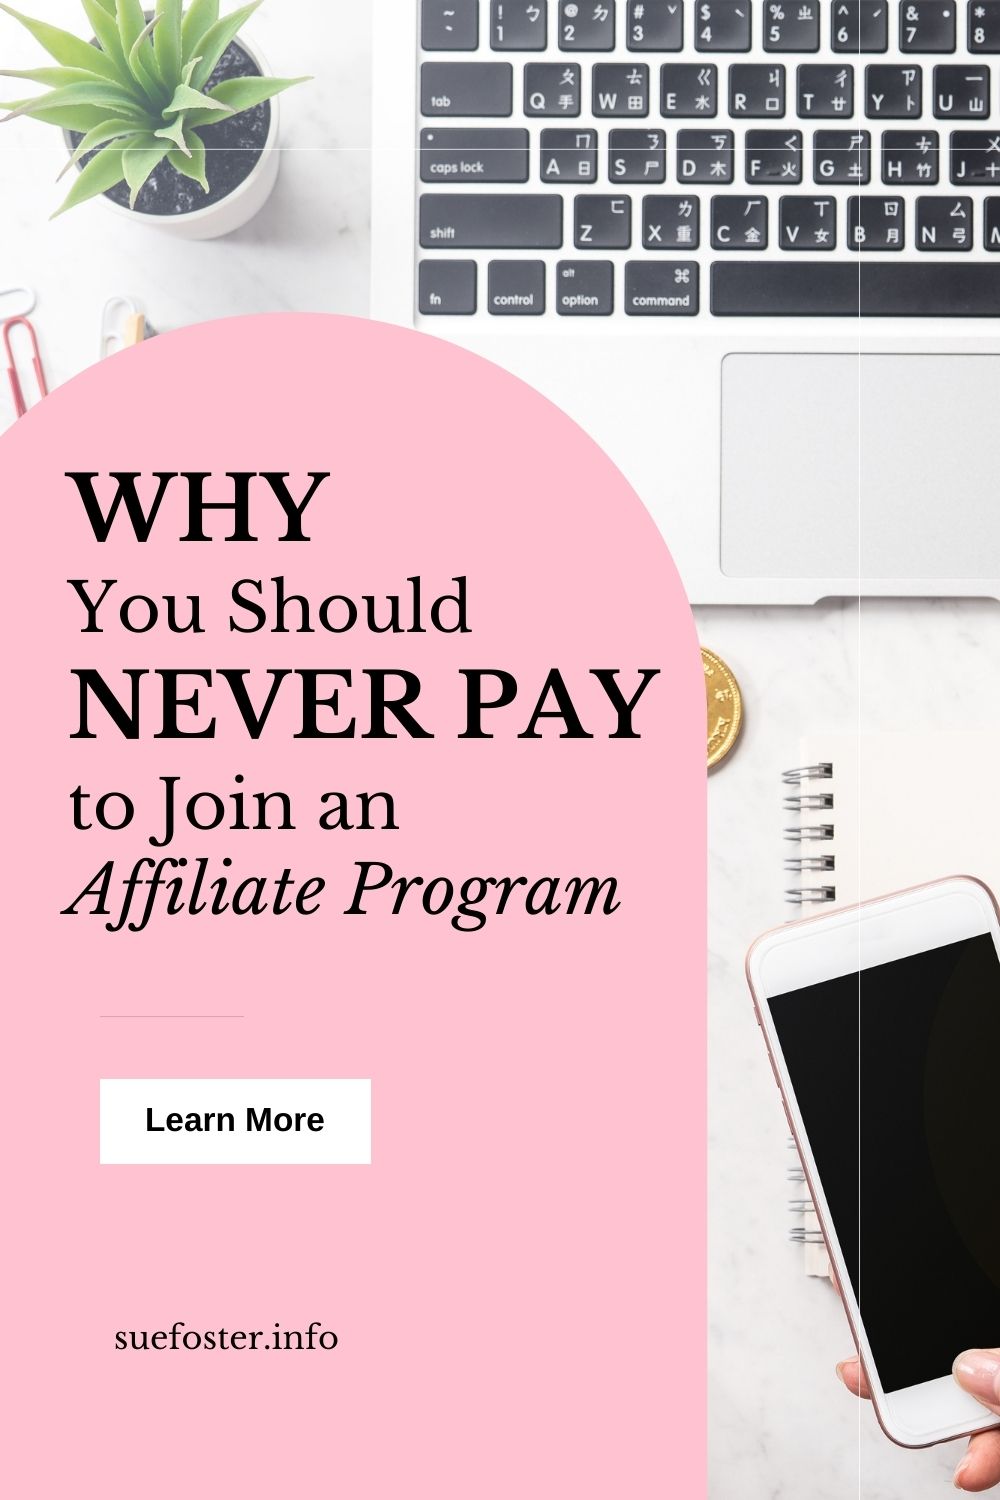 Learn why paying to join an affiliate program can lead to potential scams, hidden costs, and limited earning potential. Stay alert and prioritise transparency in affiliate marketing.